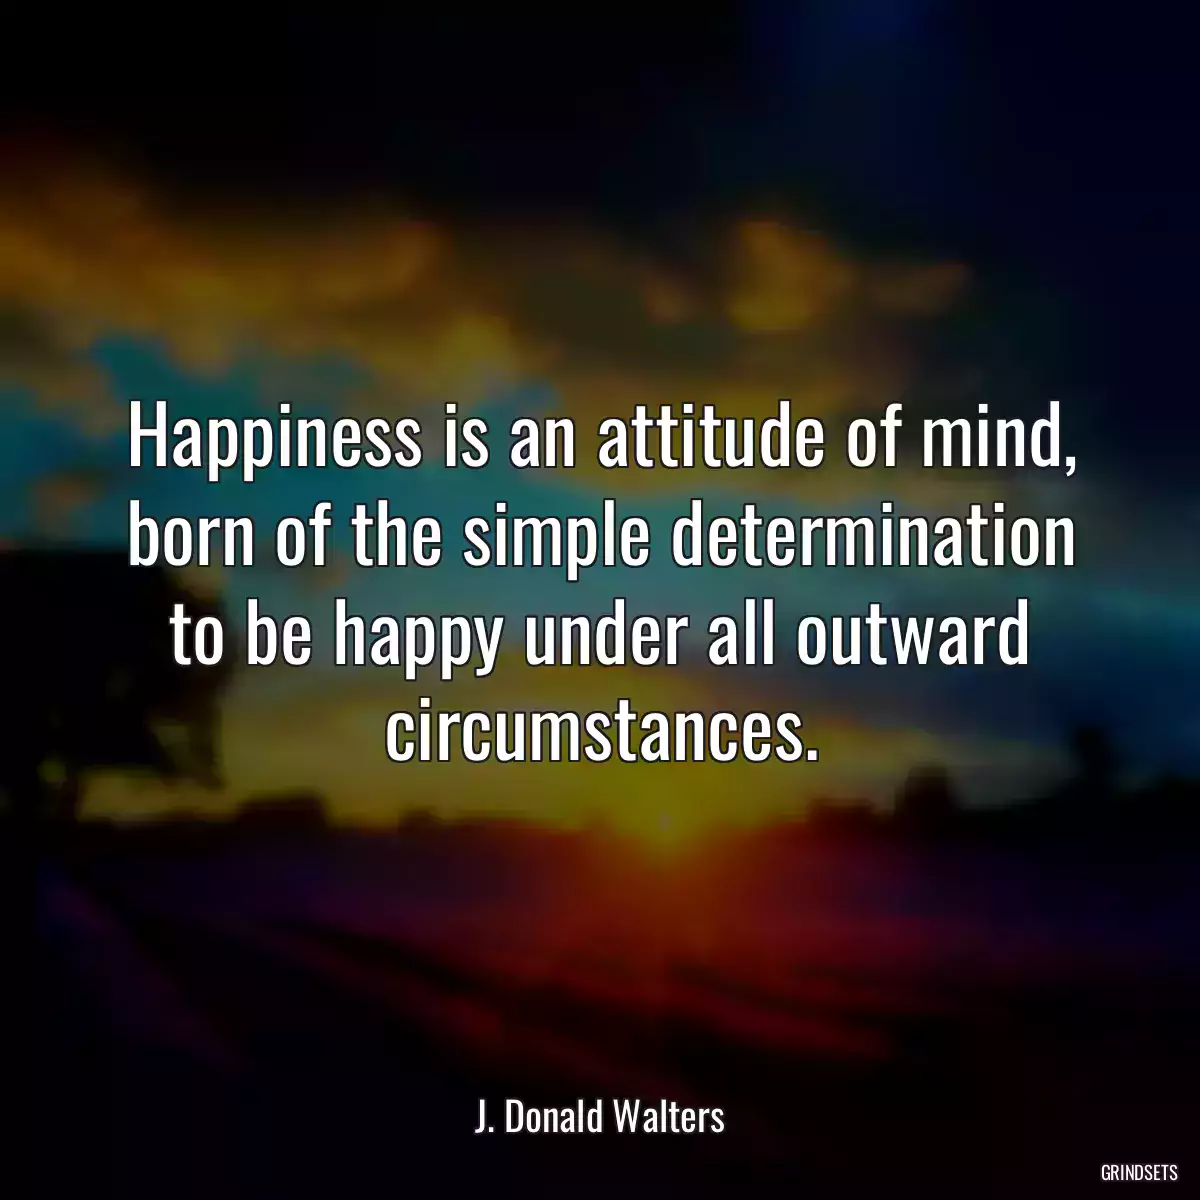 Happiness is an attitude of mind, born of the simple determination to be happy under all outward circumstances.